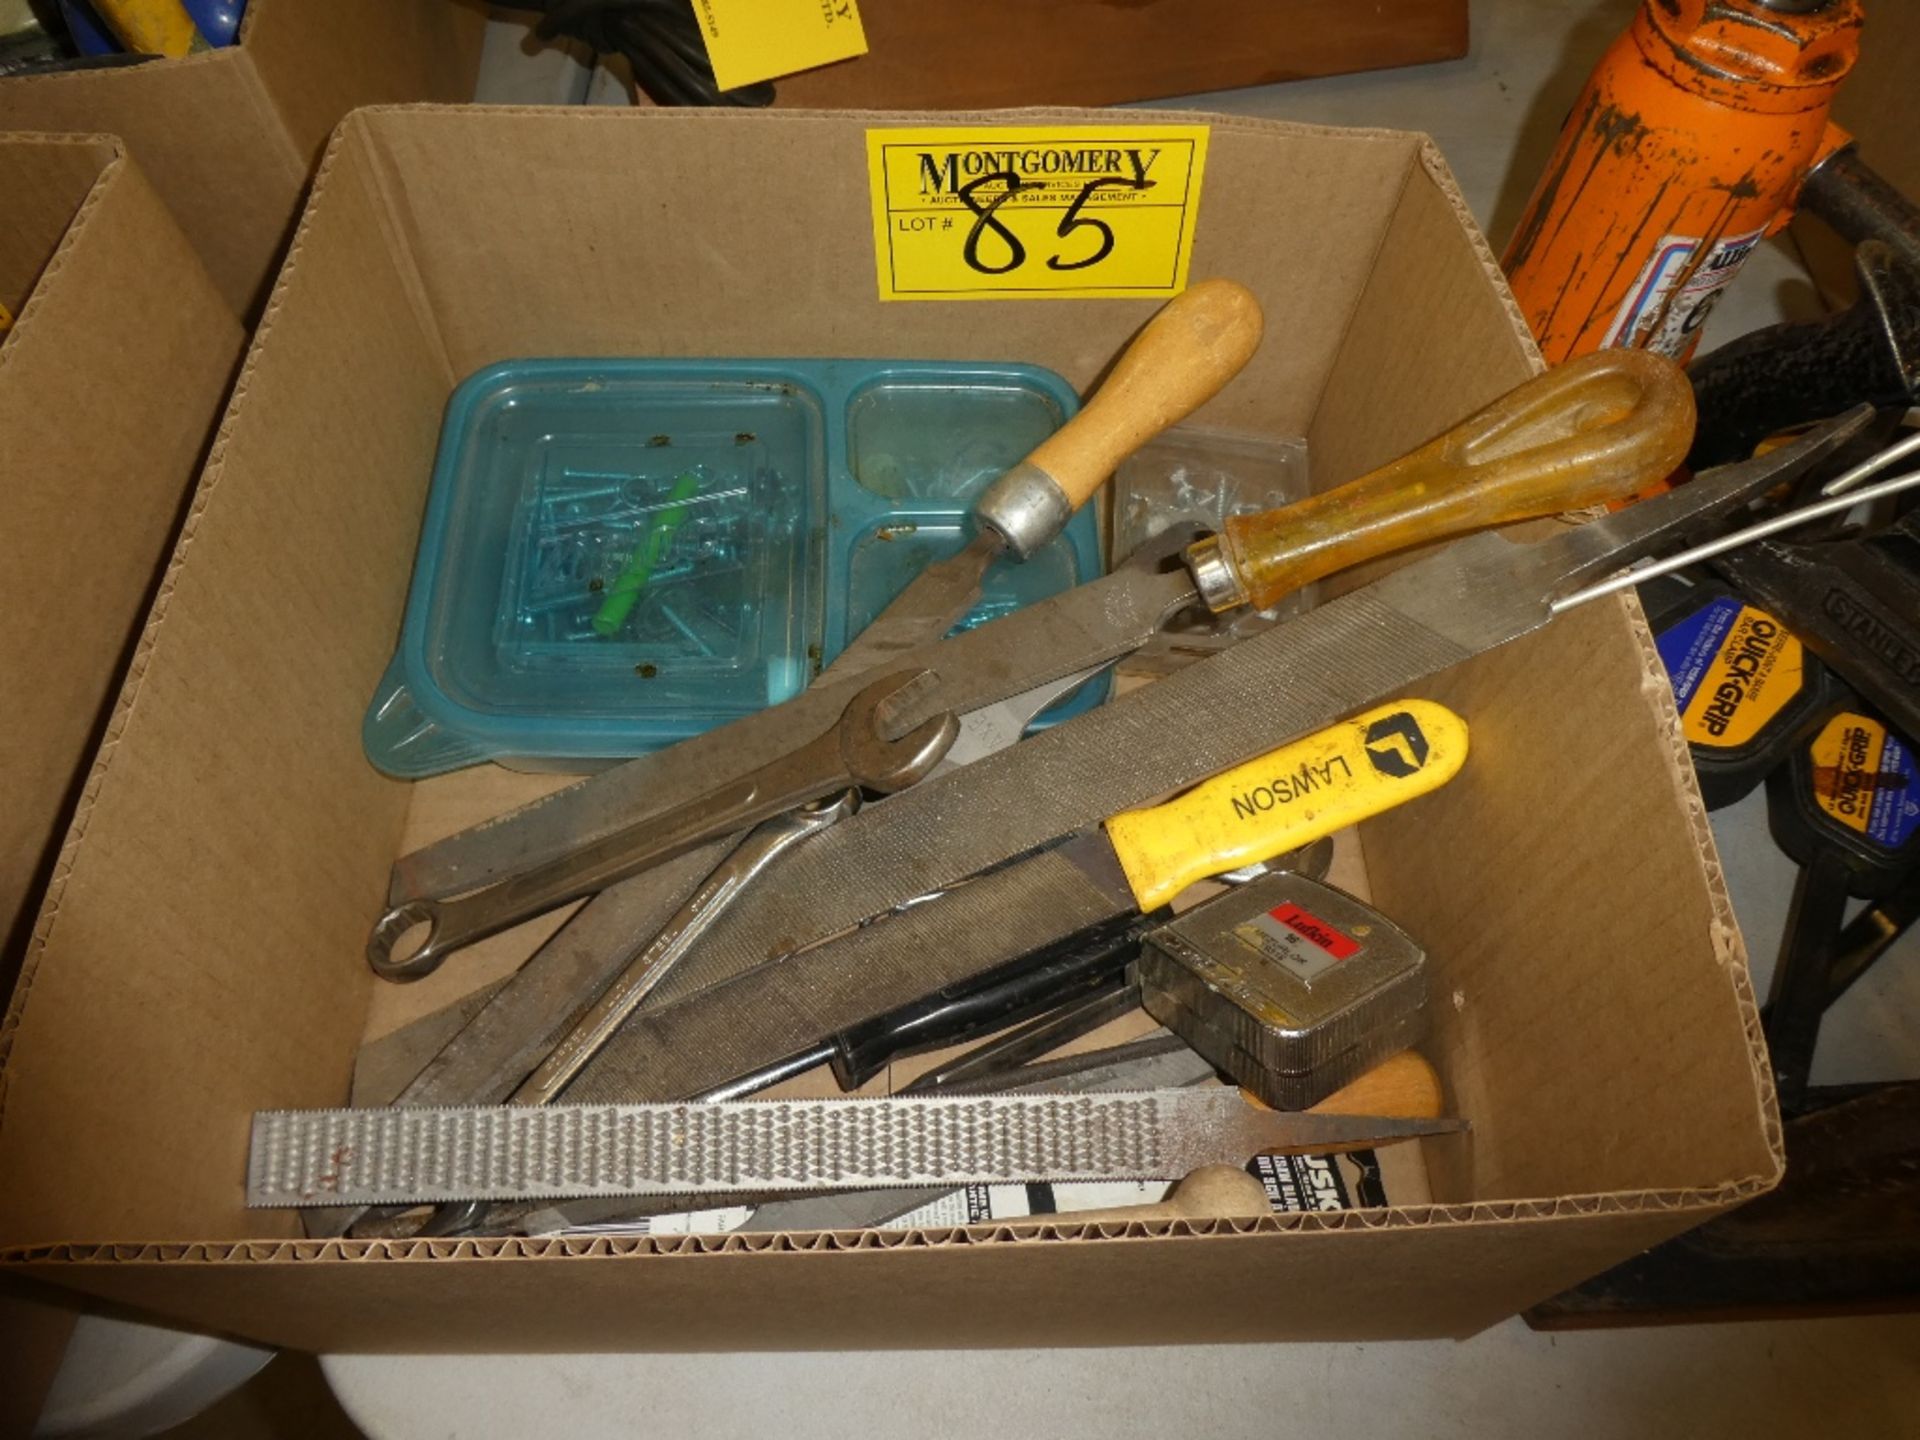 L/O HAND FILES, HAND WRENCHES, TAPE MEASURE, SCREWS, ETC